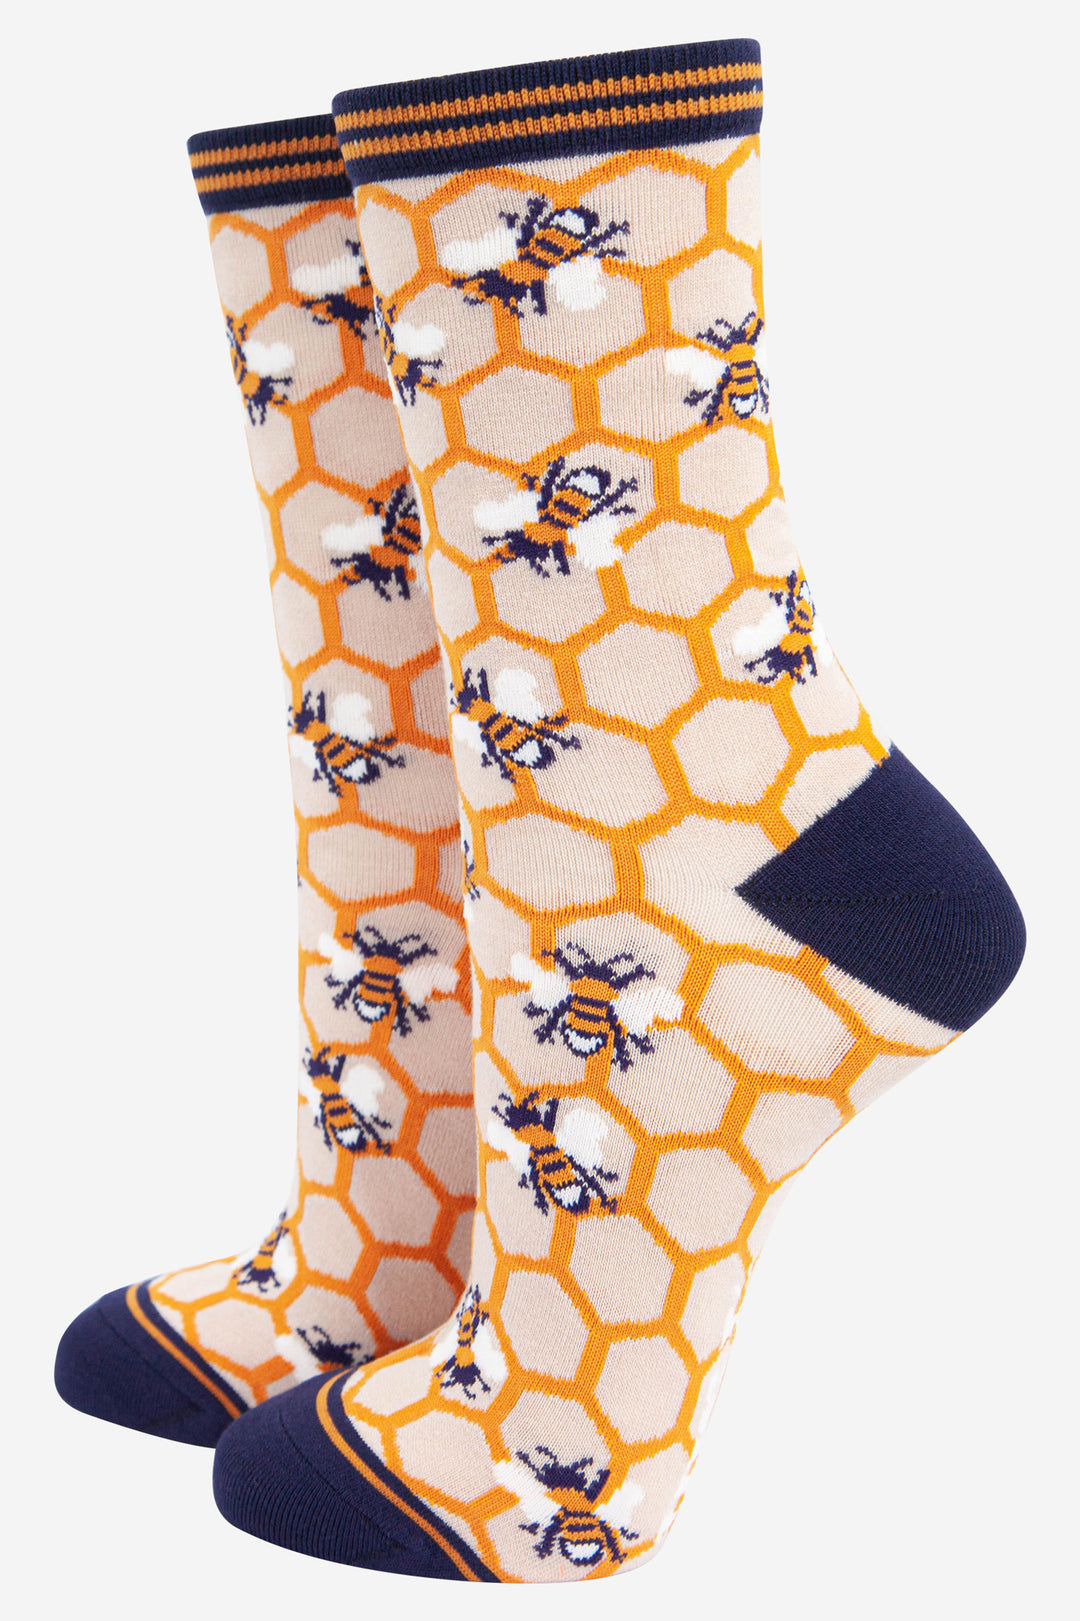 yellow and blue bamboo sock designed to look like a honeycomb with an all over pattern of bees